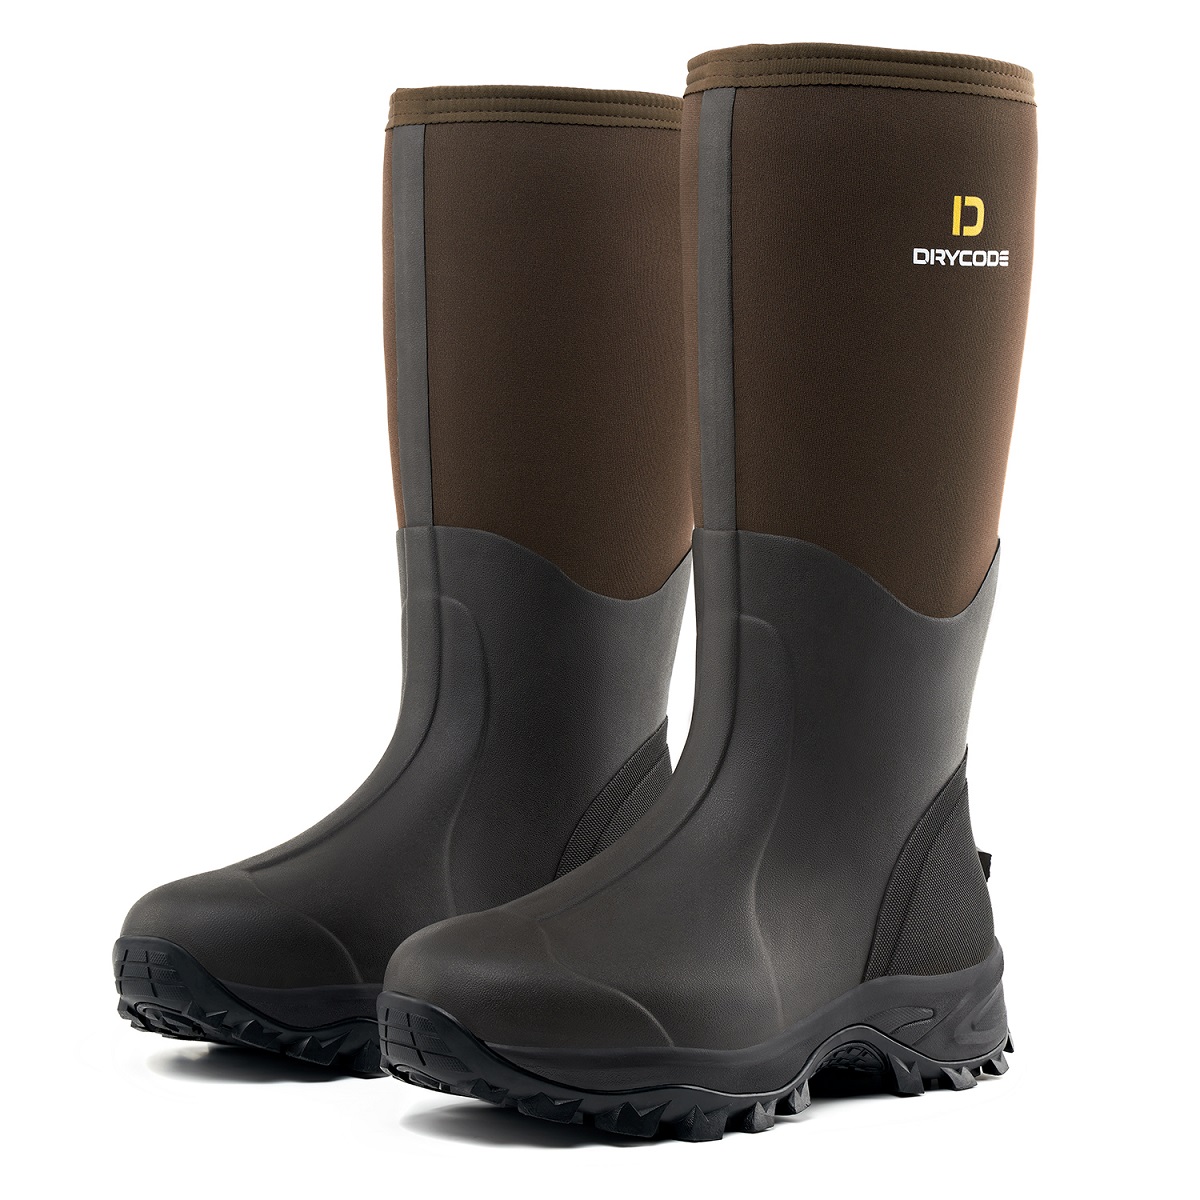 Rubber Boots and Waders on Sale